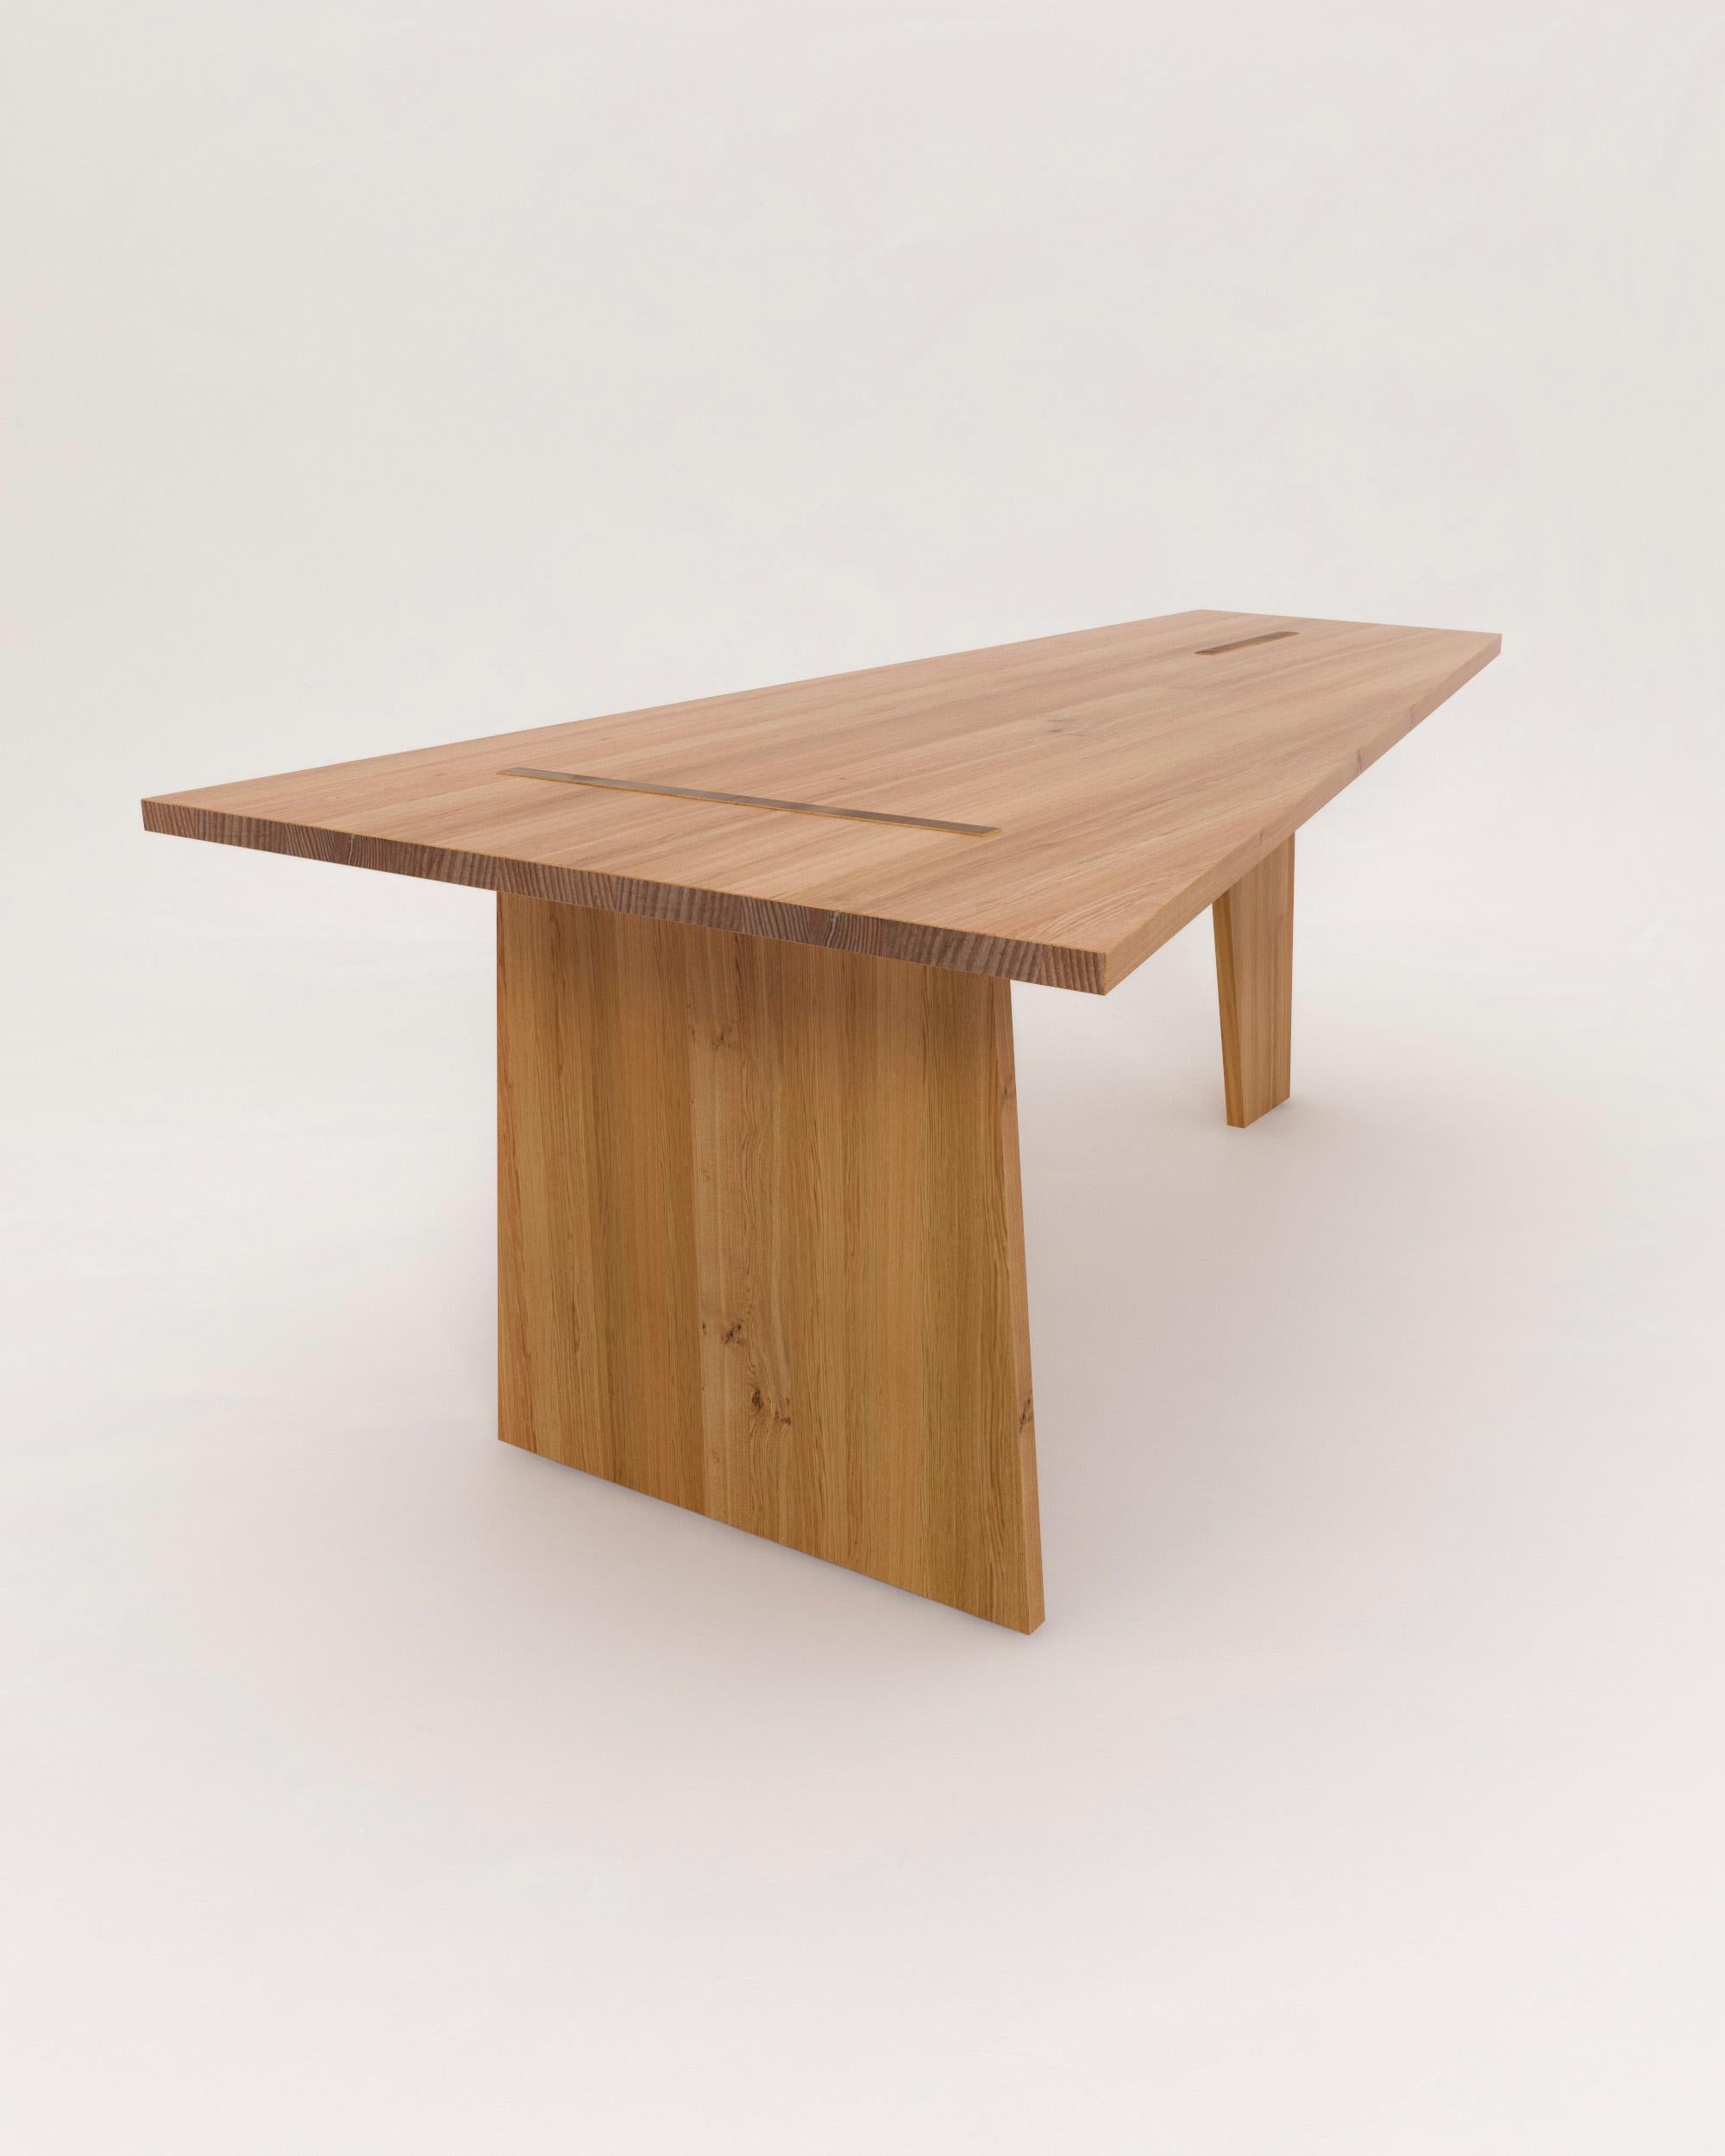 Crooked dining table by Nazara Lázaro.
Dimensions: H 75 x W 200 x D 100 cm.
Materials: Massive oak with oil wax surface.

All pieces are available in natural massive oak, walnut and white lacquered wood.
Additional sizes, woods and finishes are